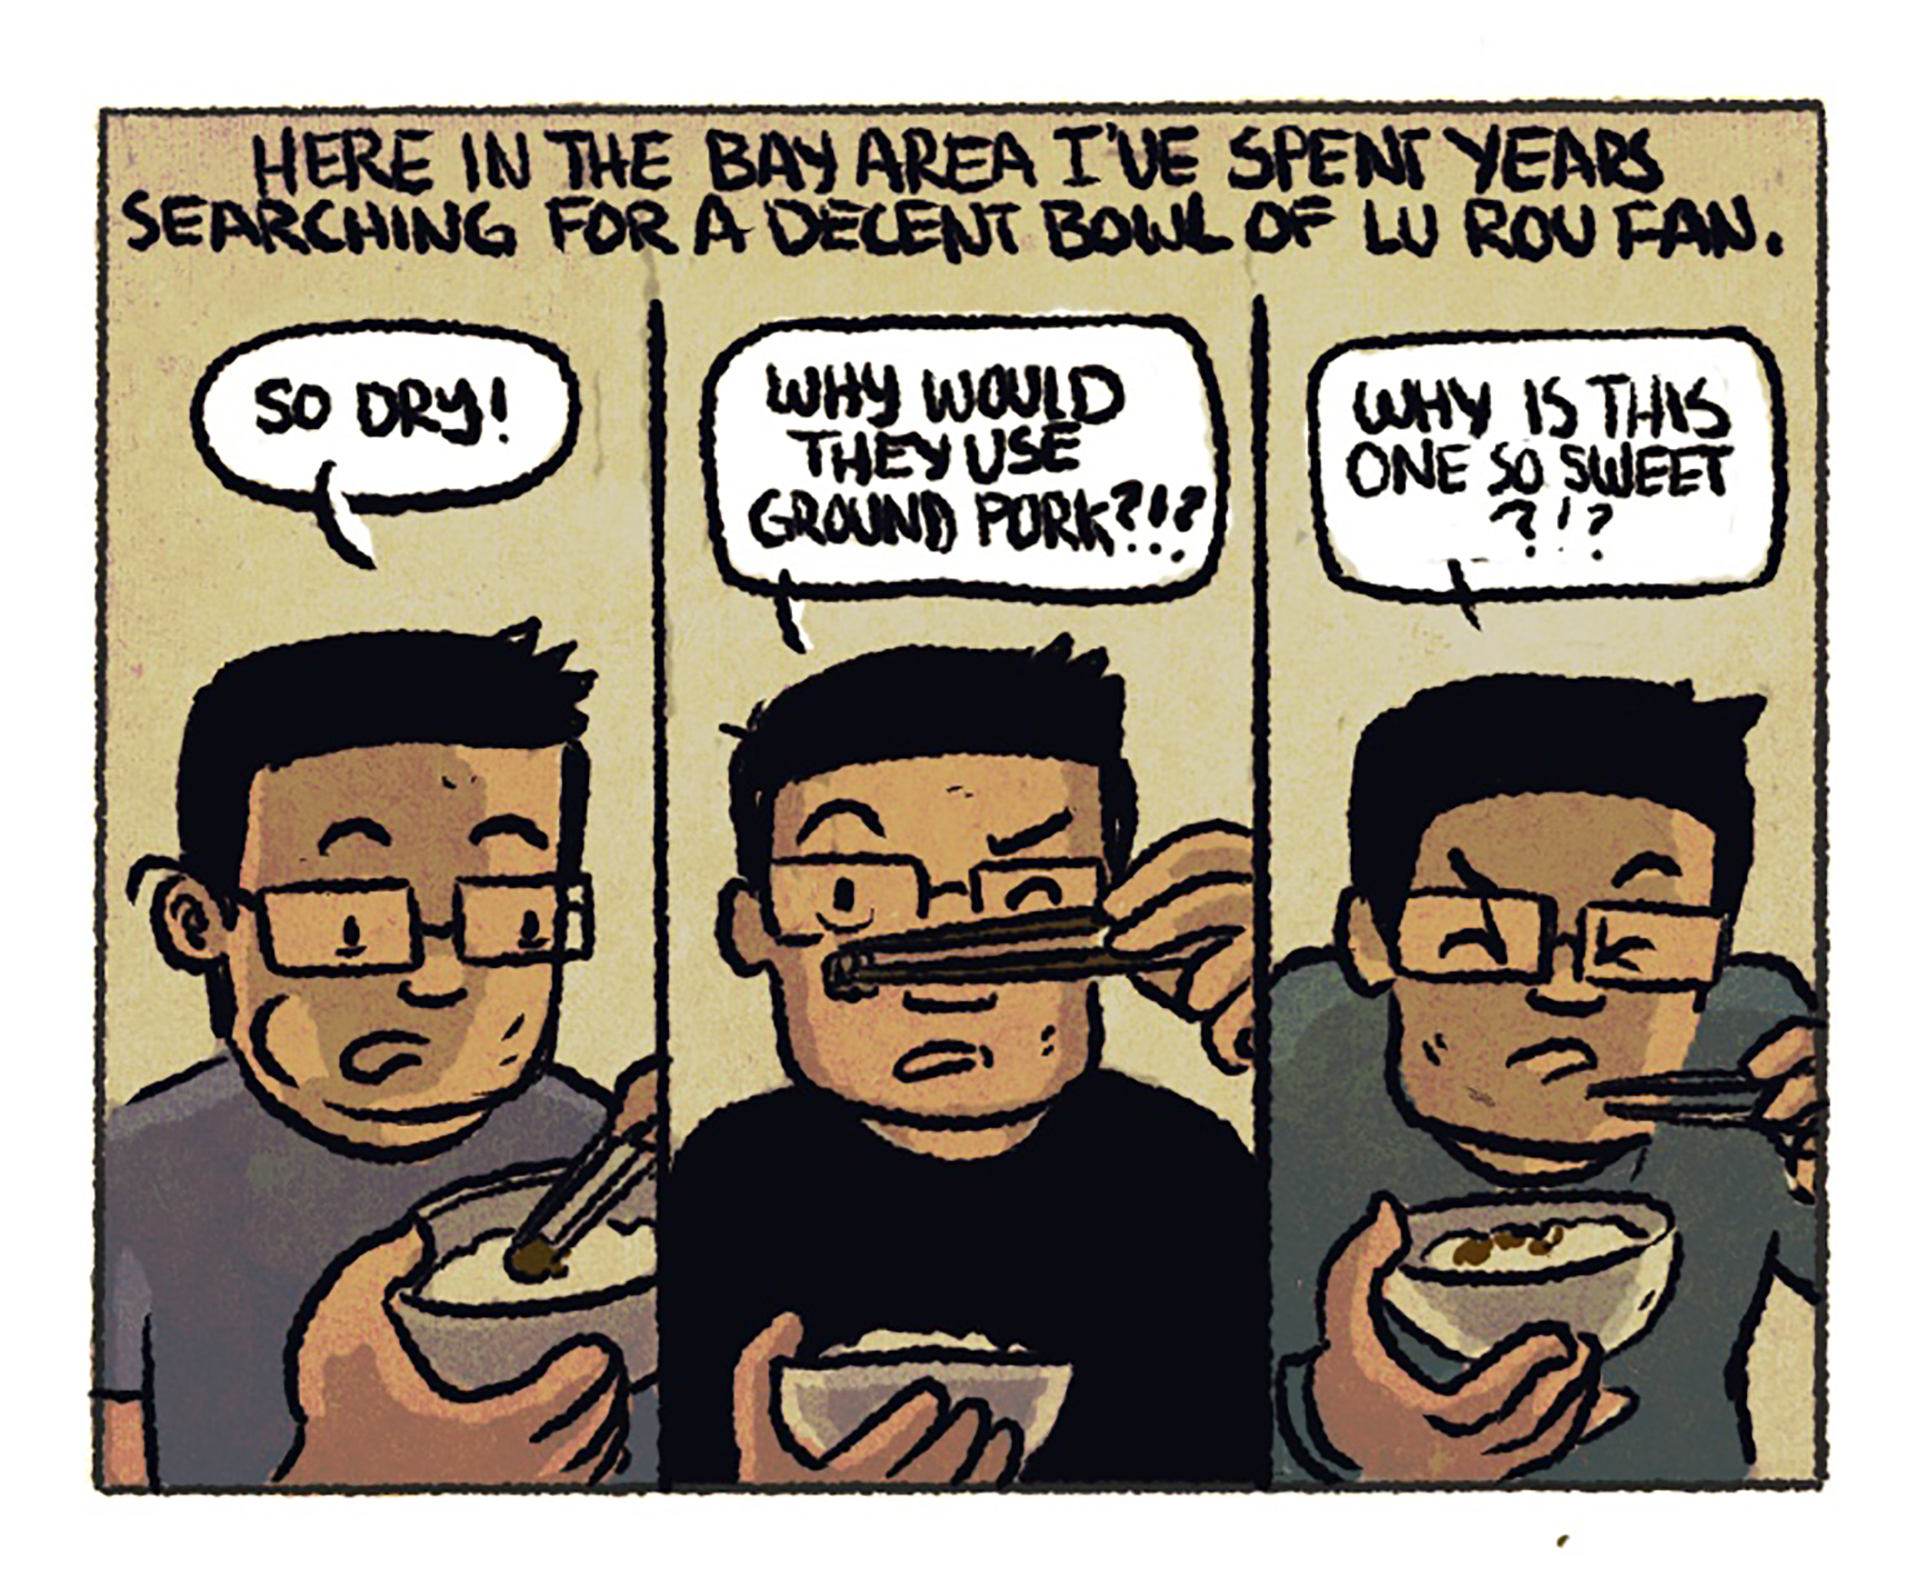 Three side-by-side panels show Luke tasting different versions of lu rou fan with an irritated expression on his face. The narration reads: "Here in the Bay Area I've spent years searching for a decent bowl of lu rou fan." Speech bubble #1: "So dry!" Speech bubble #2: "Why would they use ground pork?!?" Speech bubble #3: "Why is this one so sweet?!!"